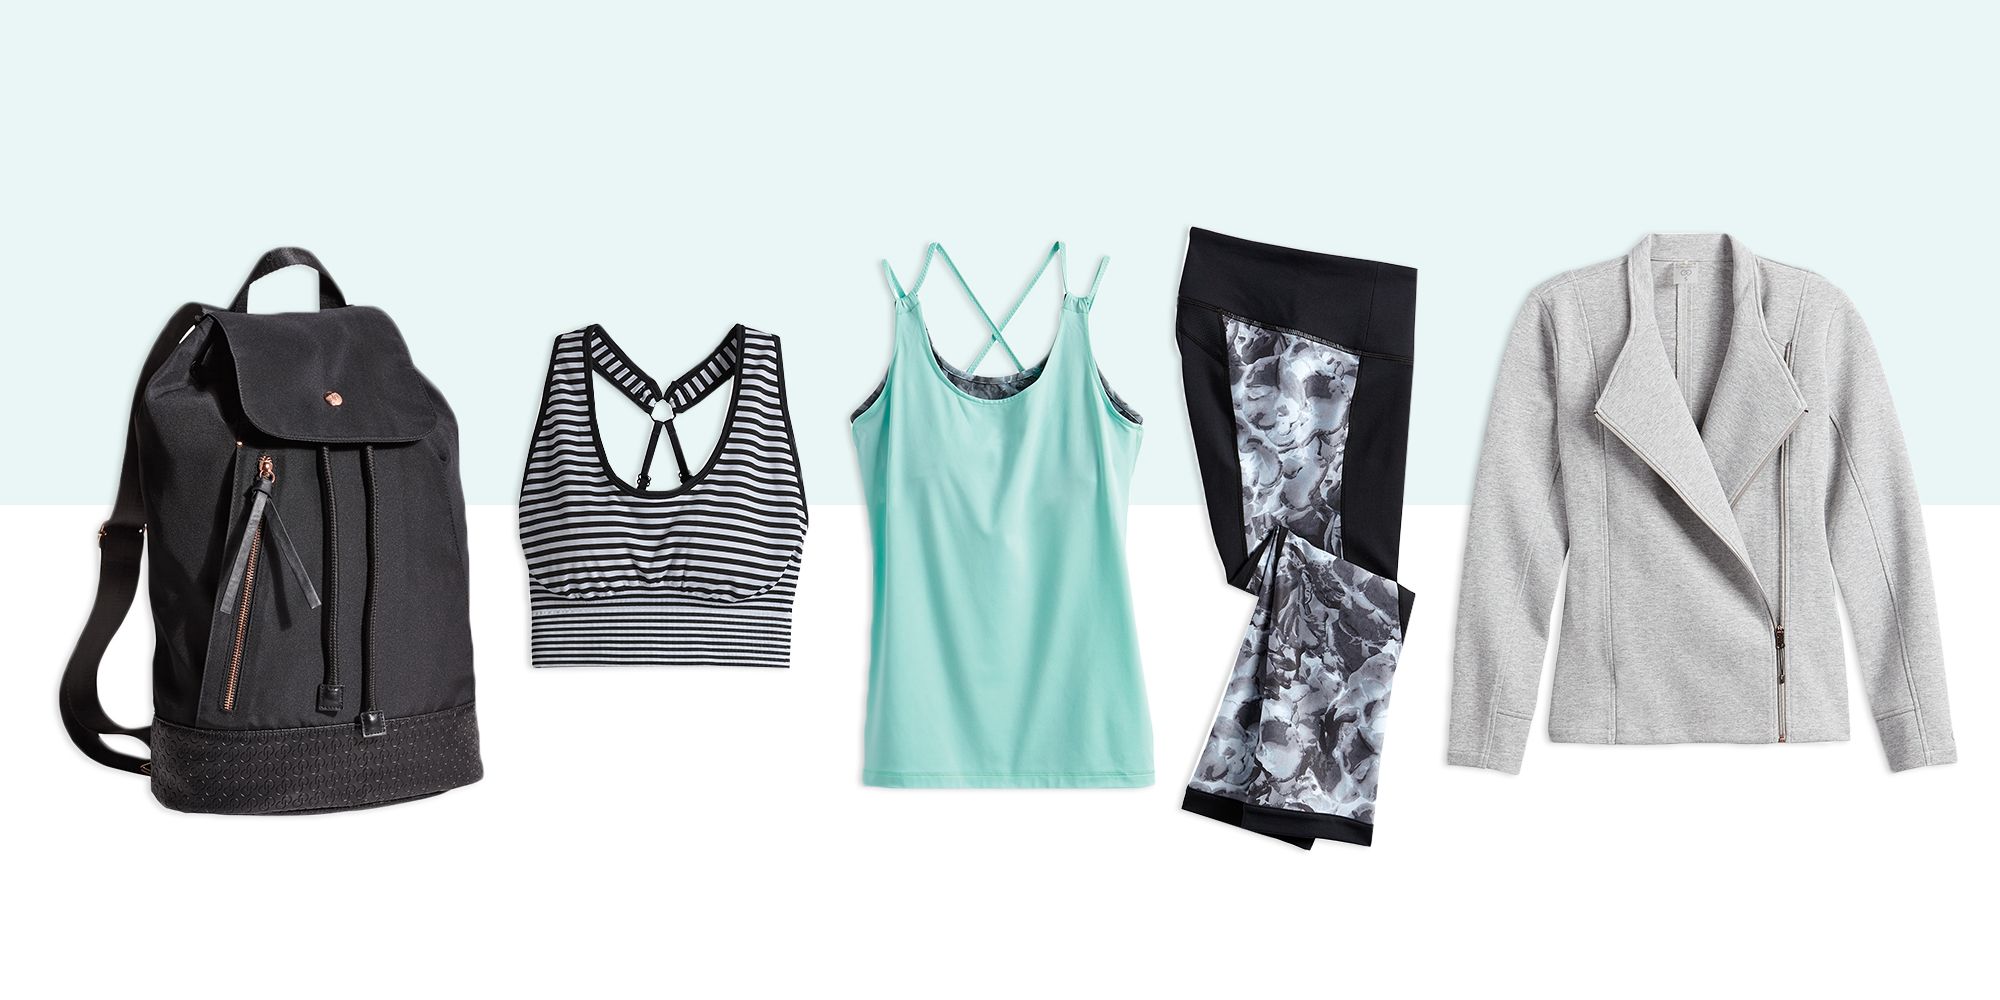 Carrie Underwood Releases Her Fitness Line, Calia